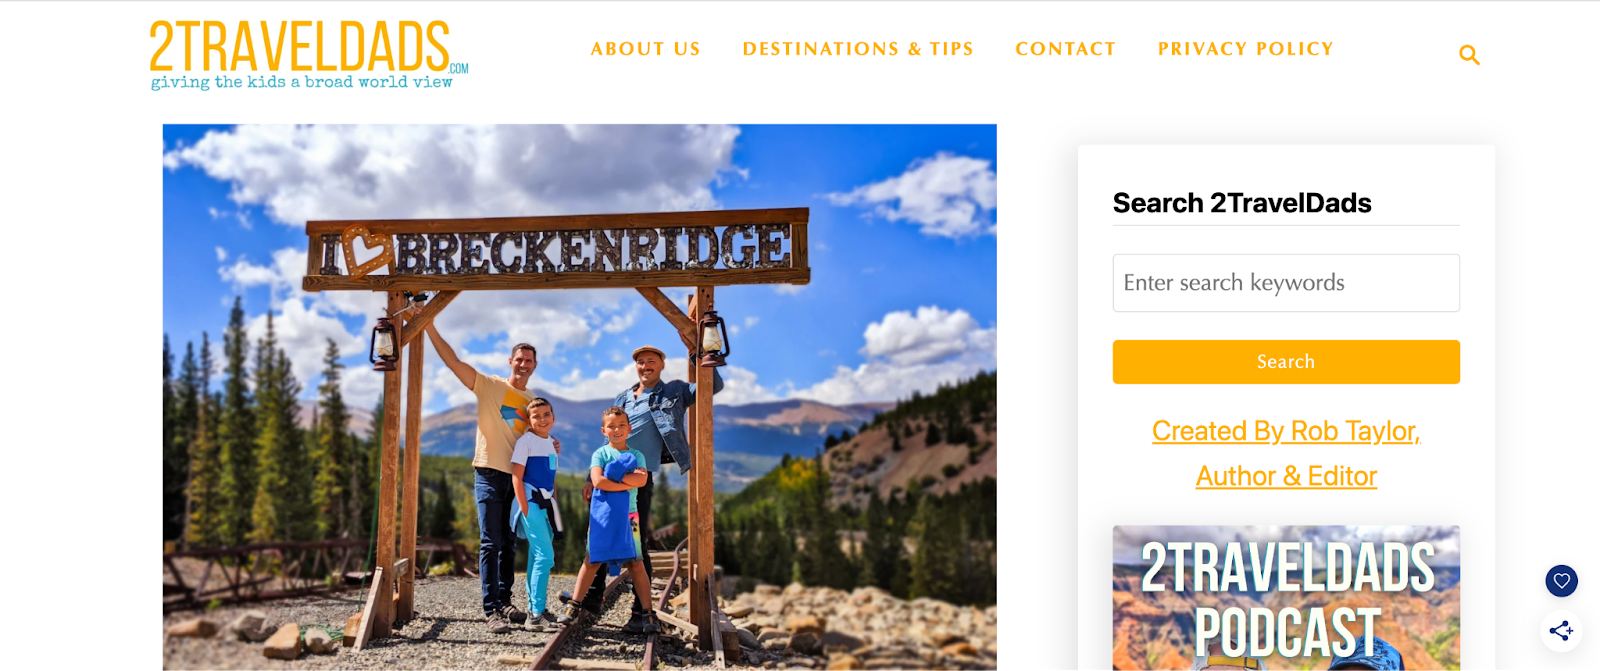 A screenshot of the homepage of 2 Travel Dads